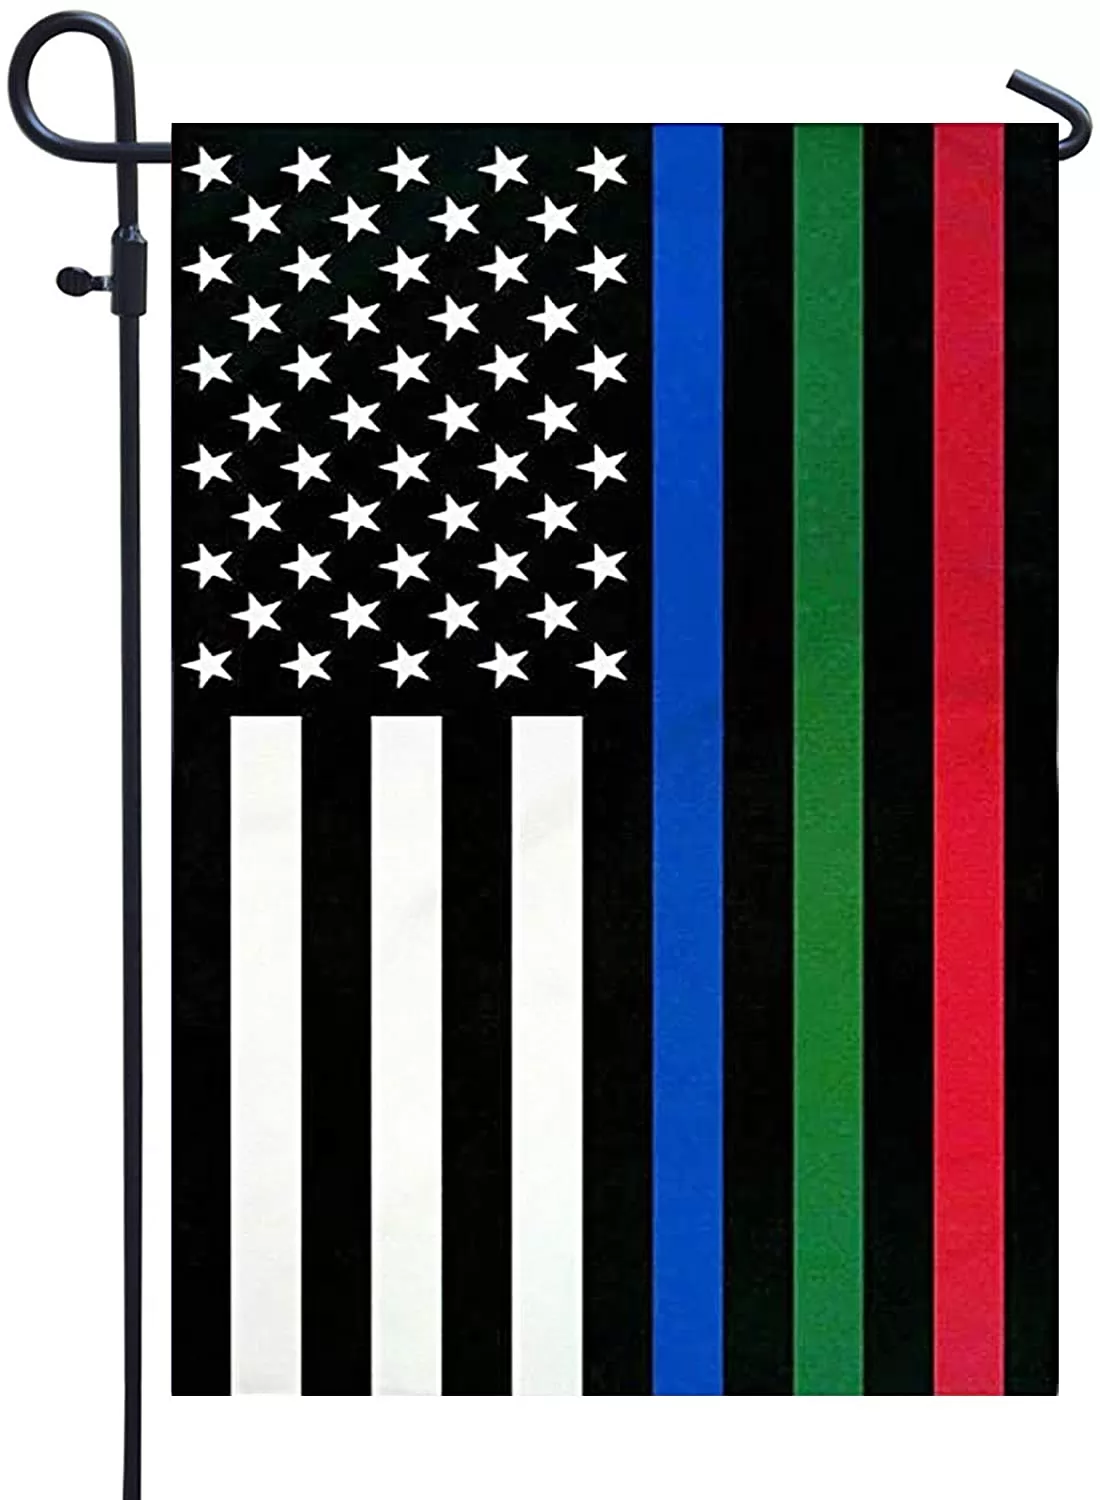 Homissor Thin Blue Green and Red Line Garden Flag- American Blue Red Green Stripe All Lives Matter Police Firefighter Military Yard Flags Banner Law E